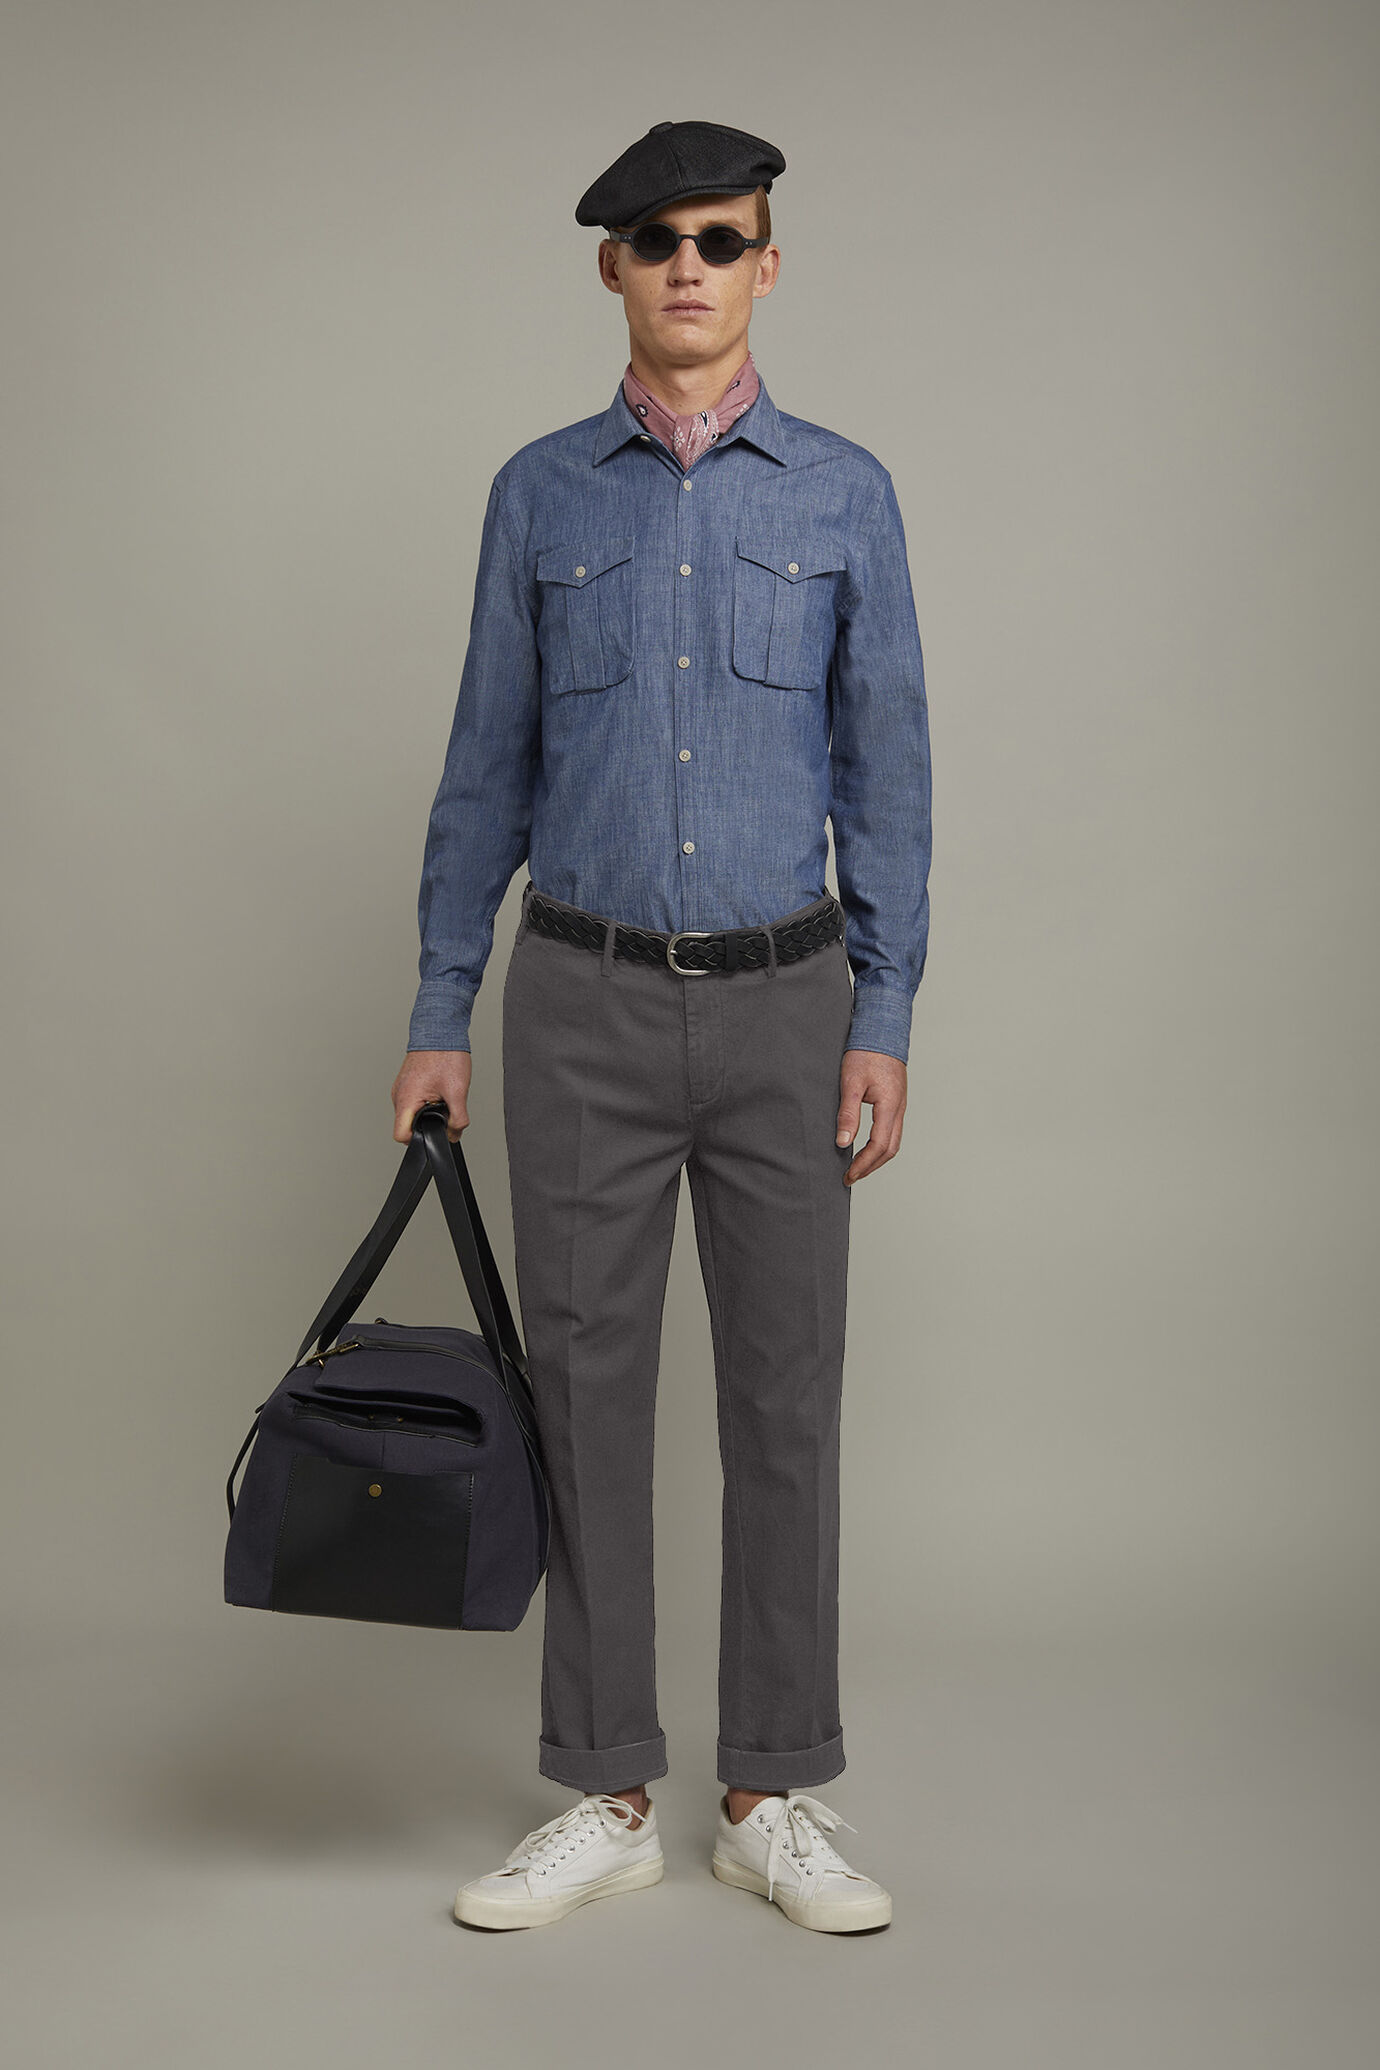 Men's classic chambray regular fit trousers